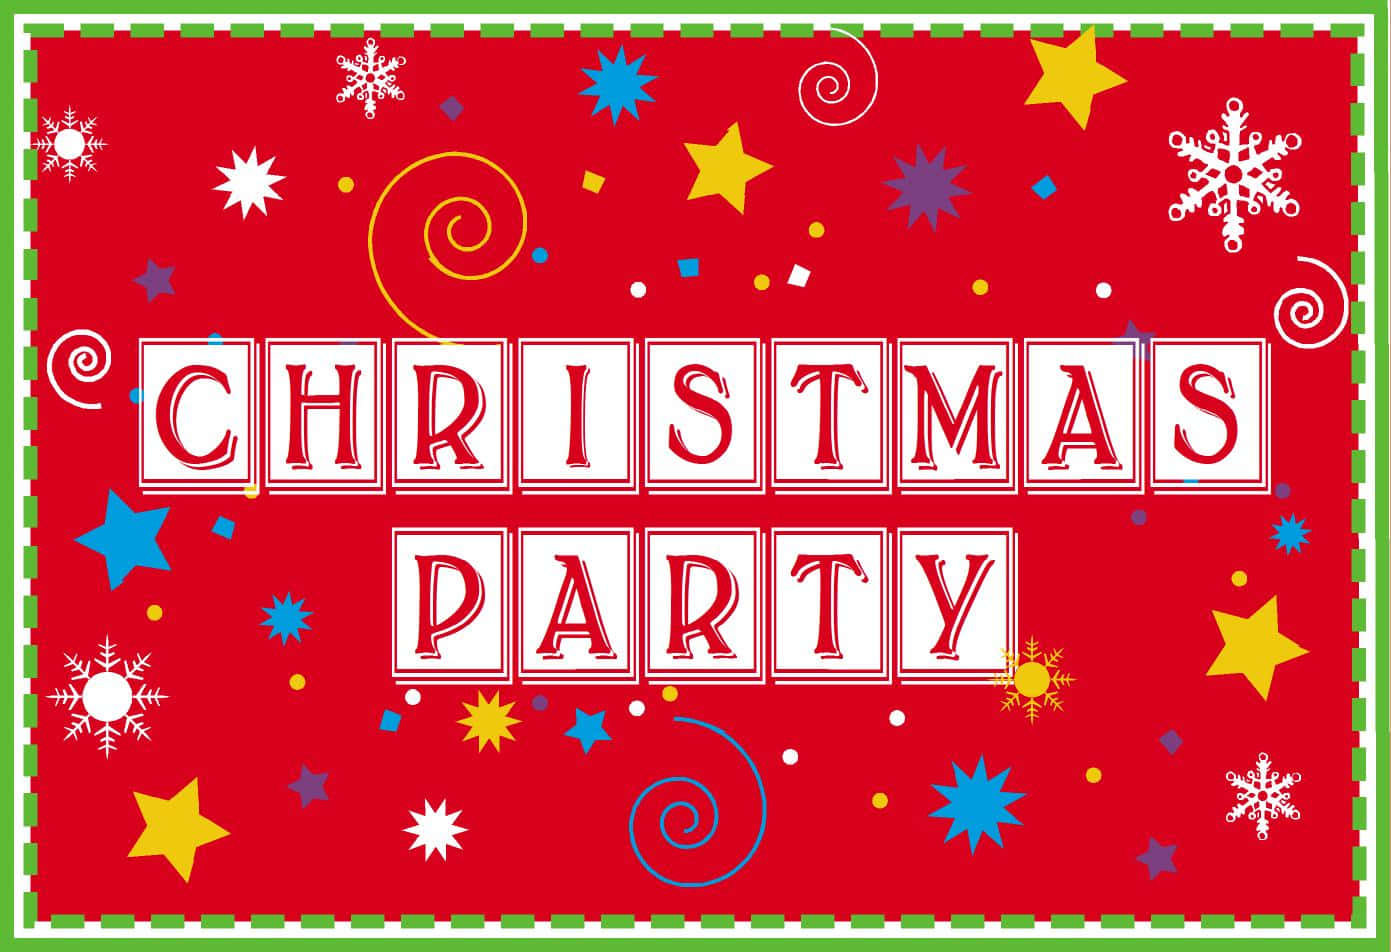 church christmas party background